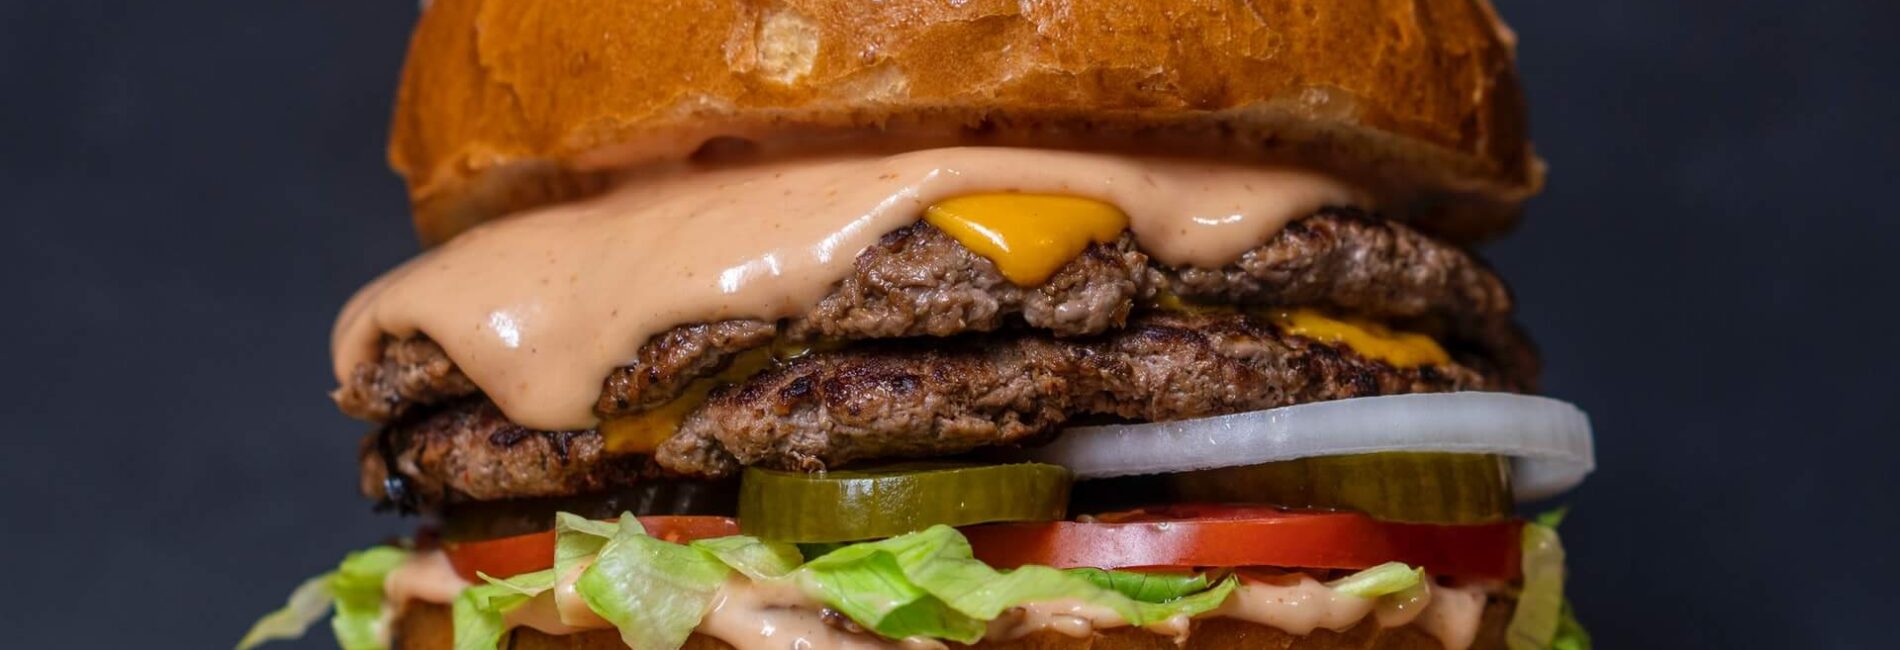 This is my pick for August: CheeseandBurger.com